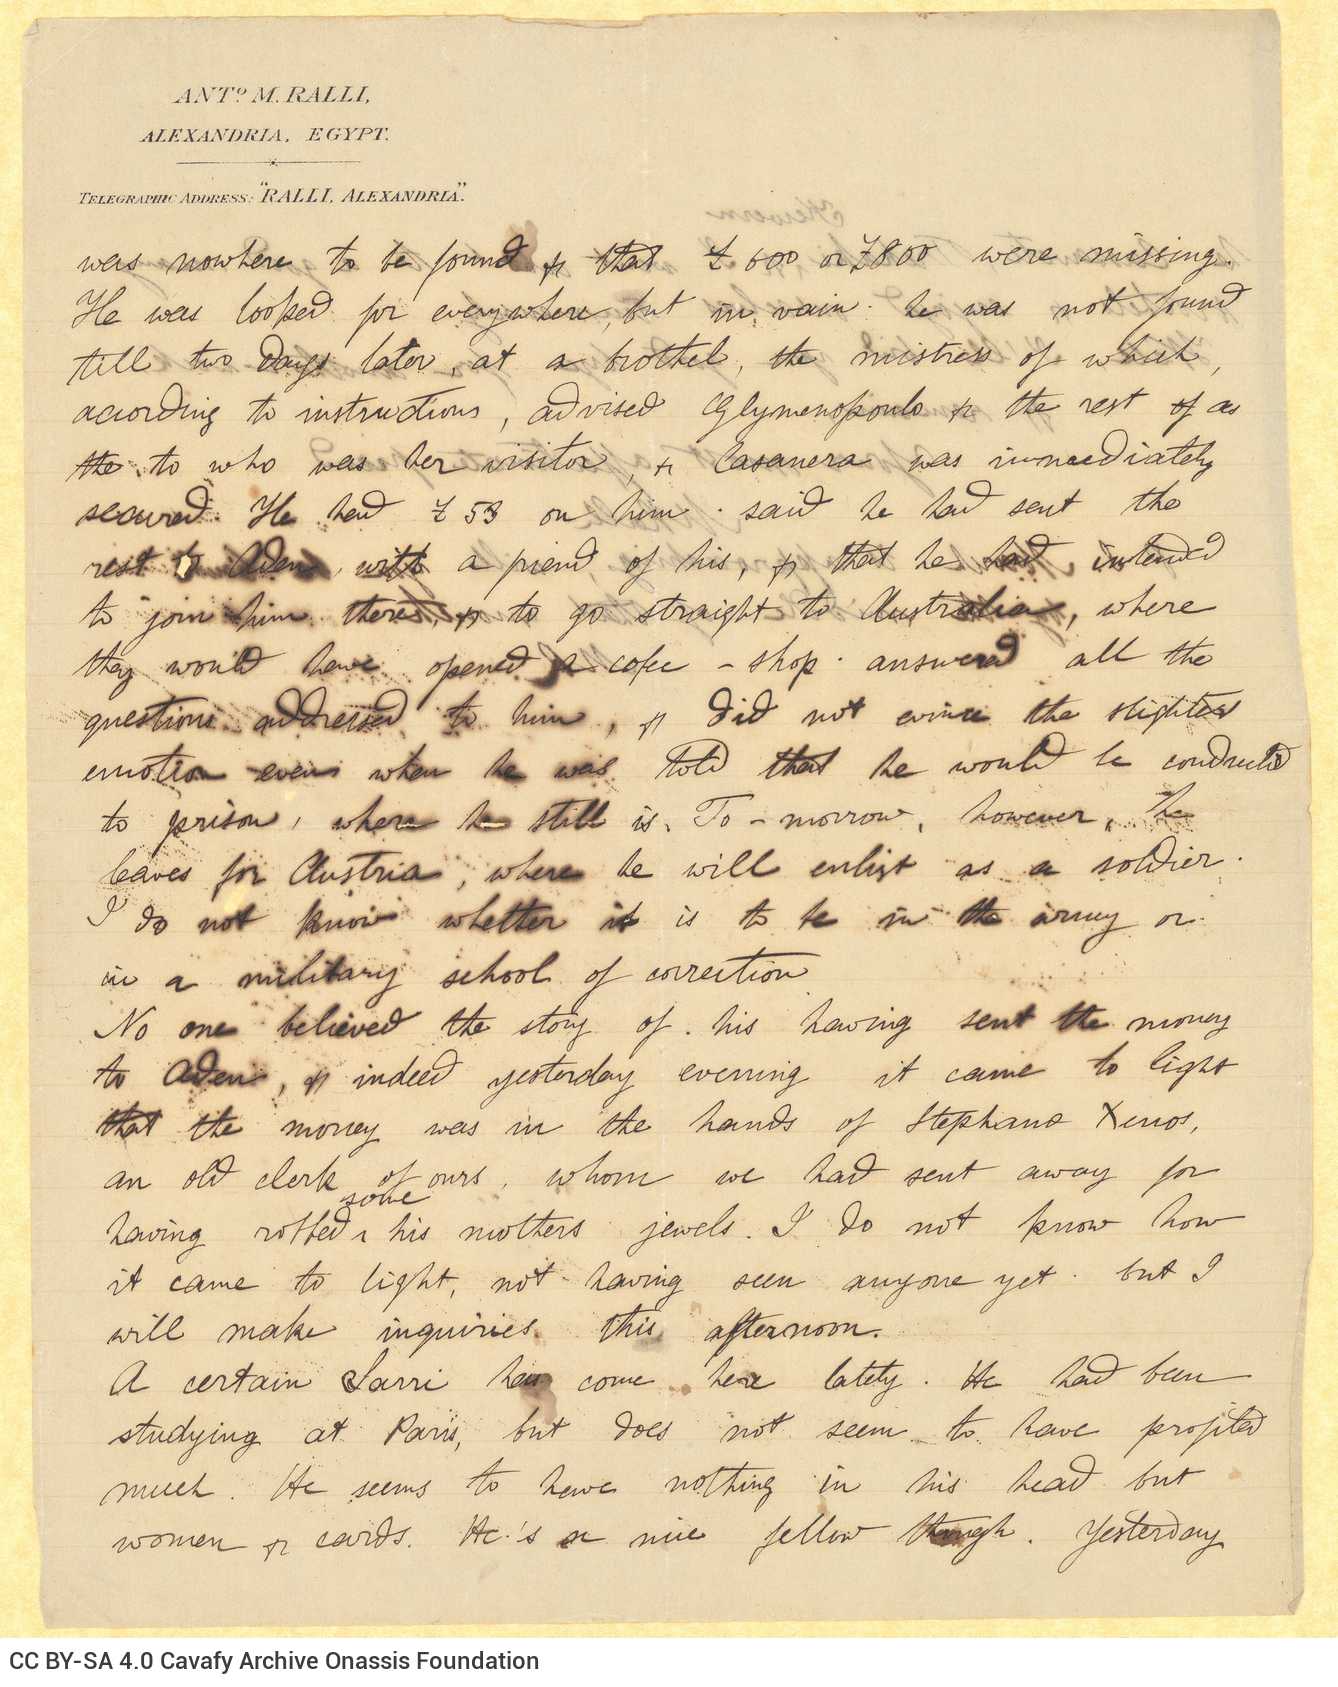 Handwritten letter by Mike Ralli to Cavafy on two sheets, with notes on all sides. Extensive reference to people and facts re